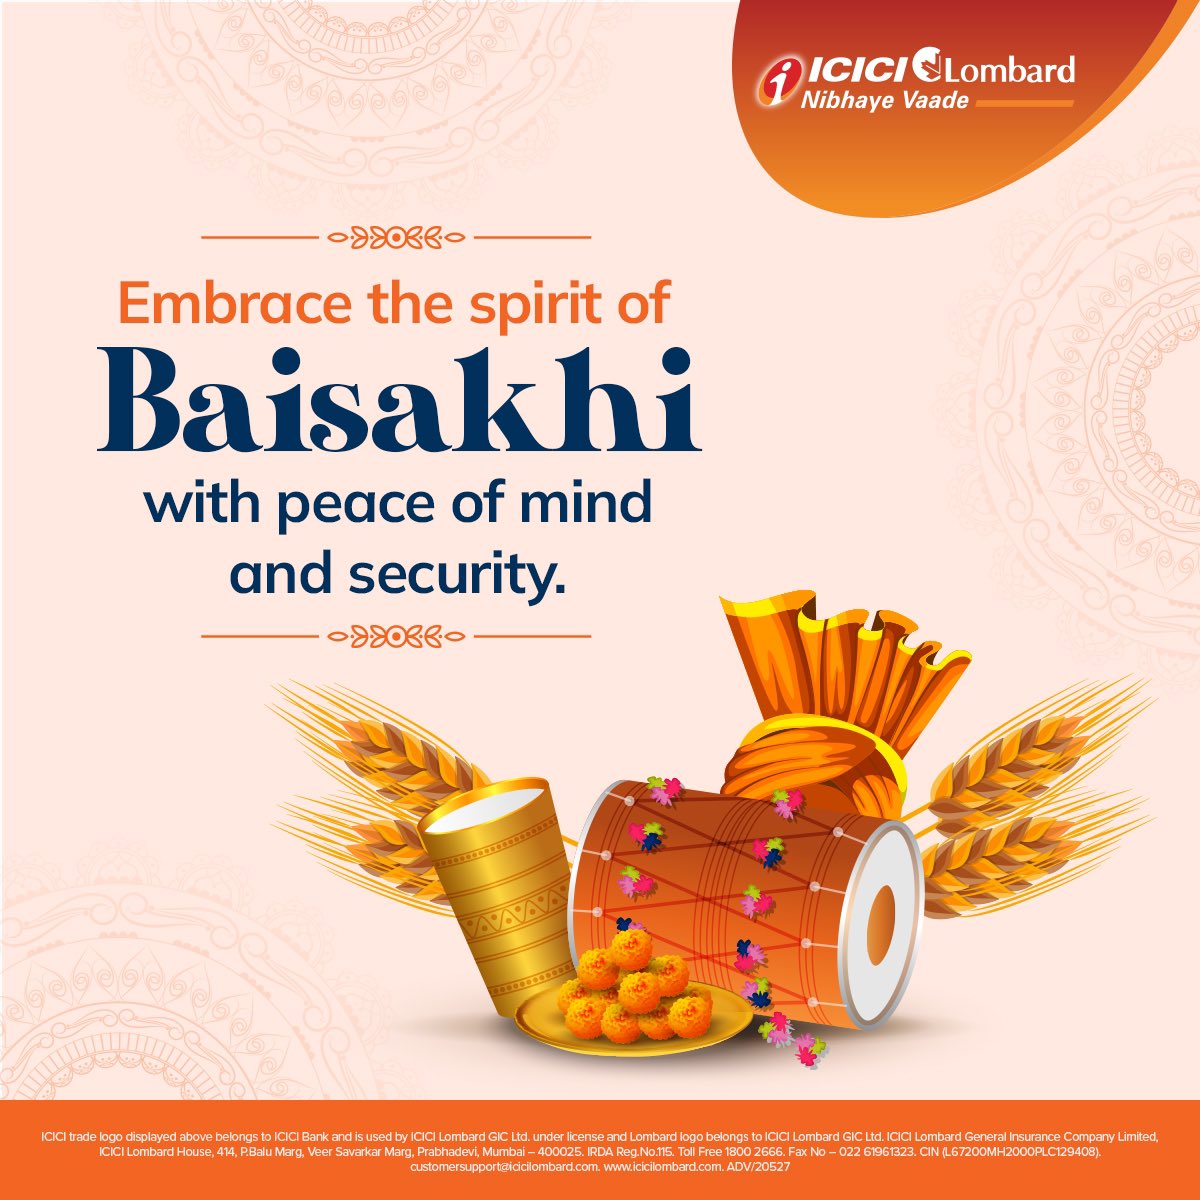 May the blessings of Baisakhi bring prosperity and happiness to your doorstep. ICICI Lombard wishes you and your family a very #HappyBaisakhi #NibhayeVaade #ICICILombard